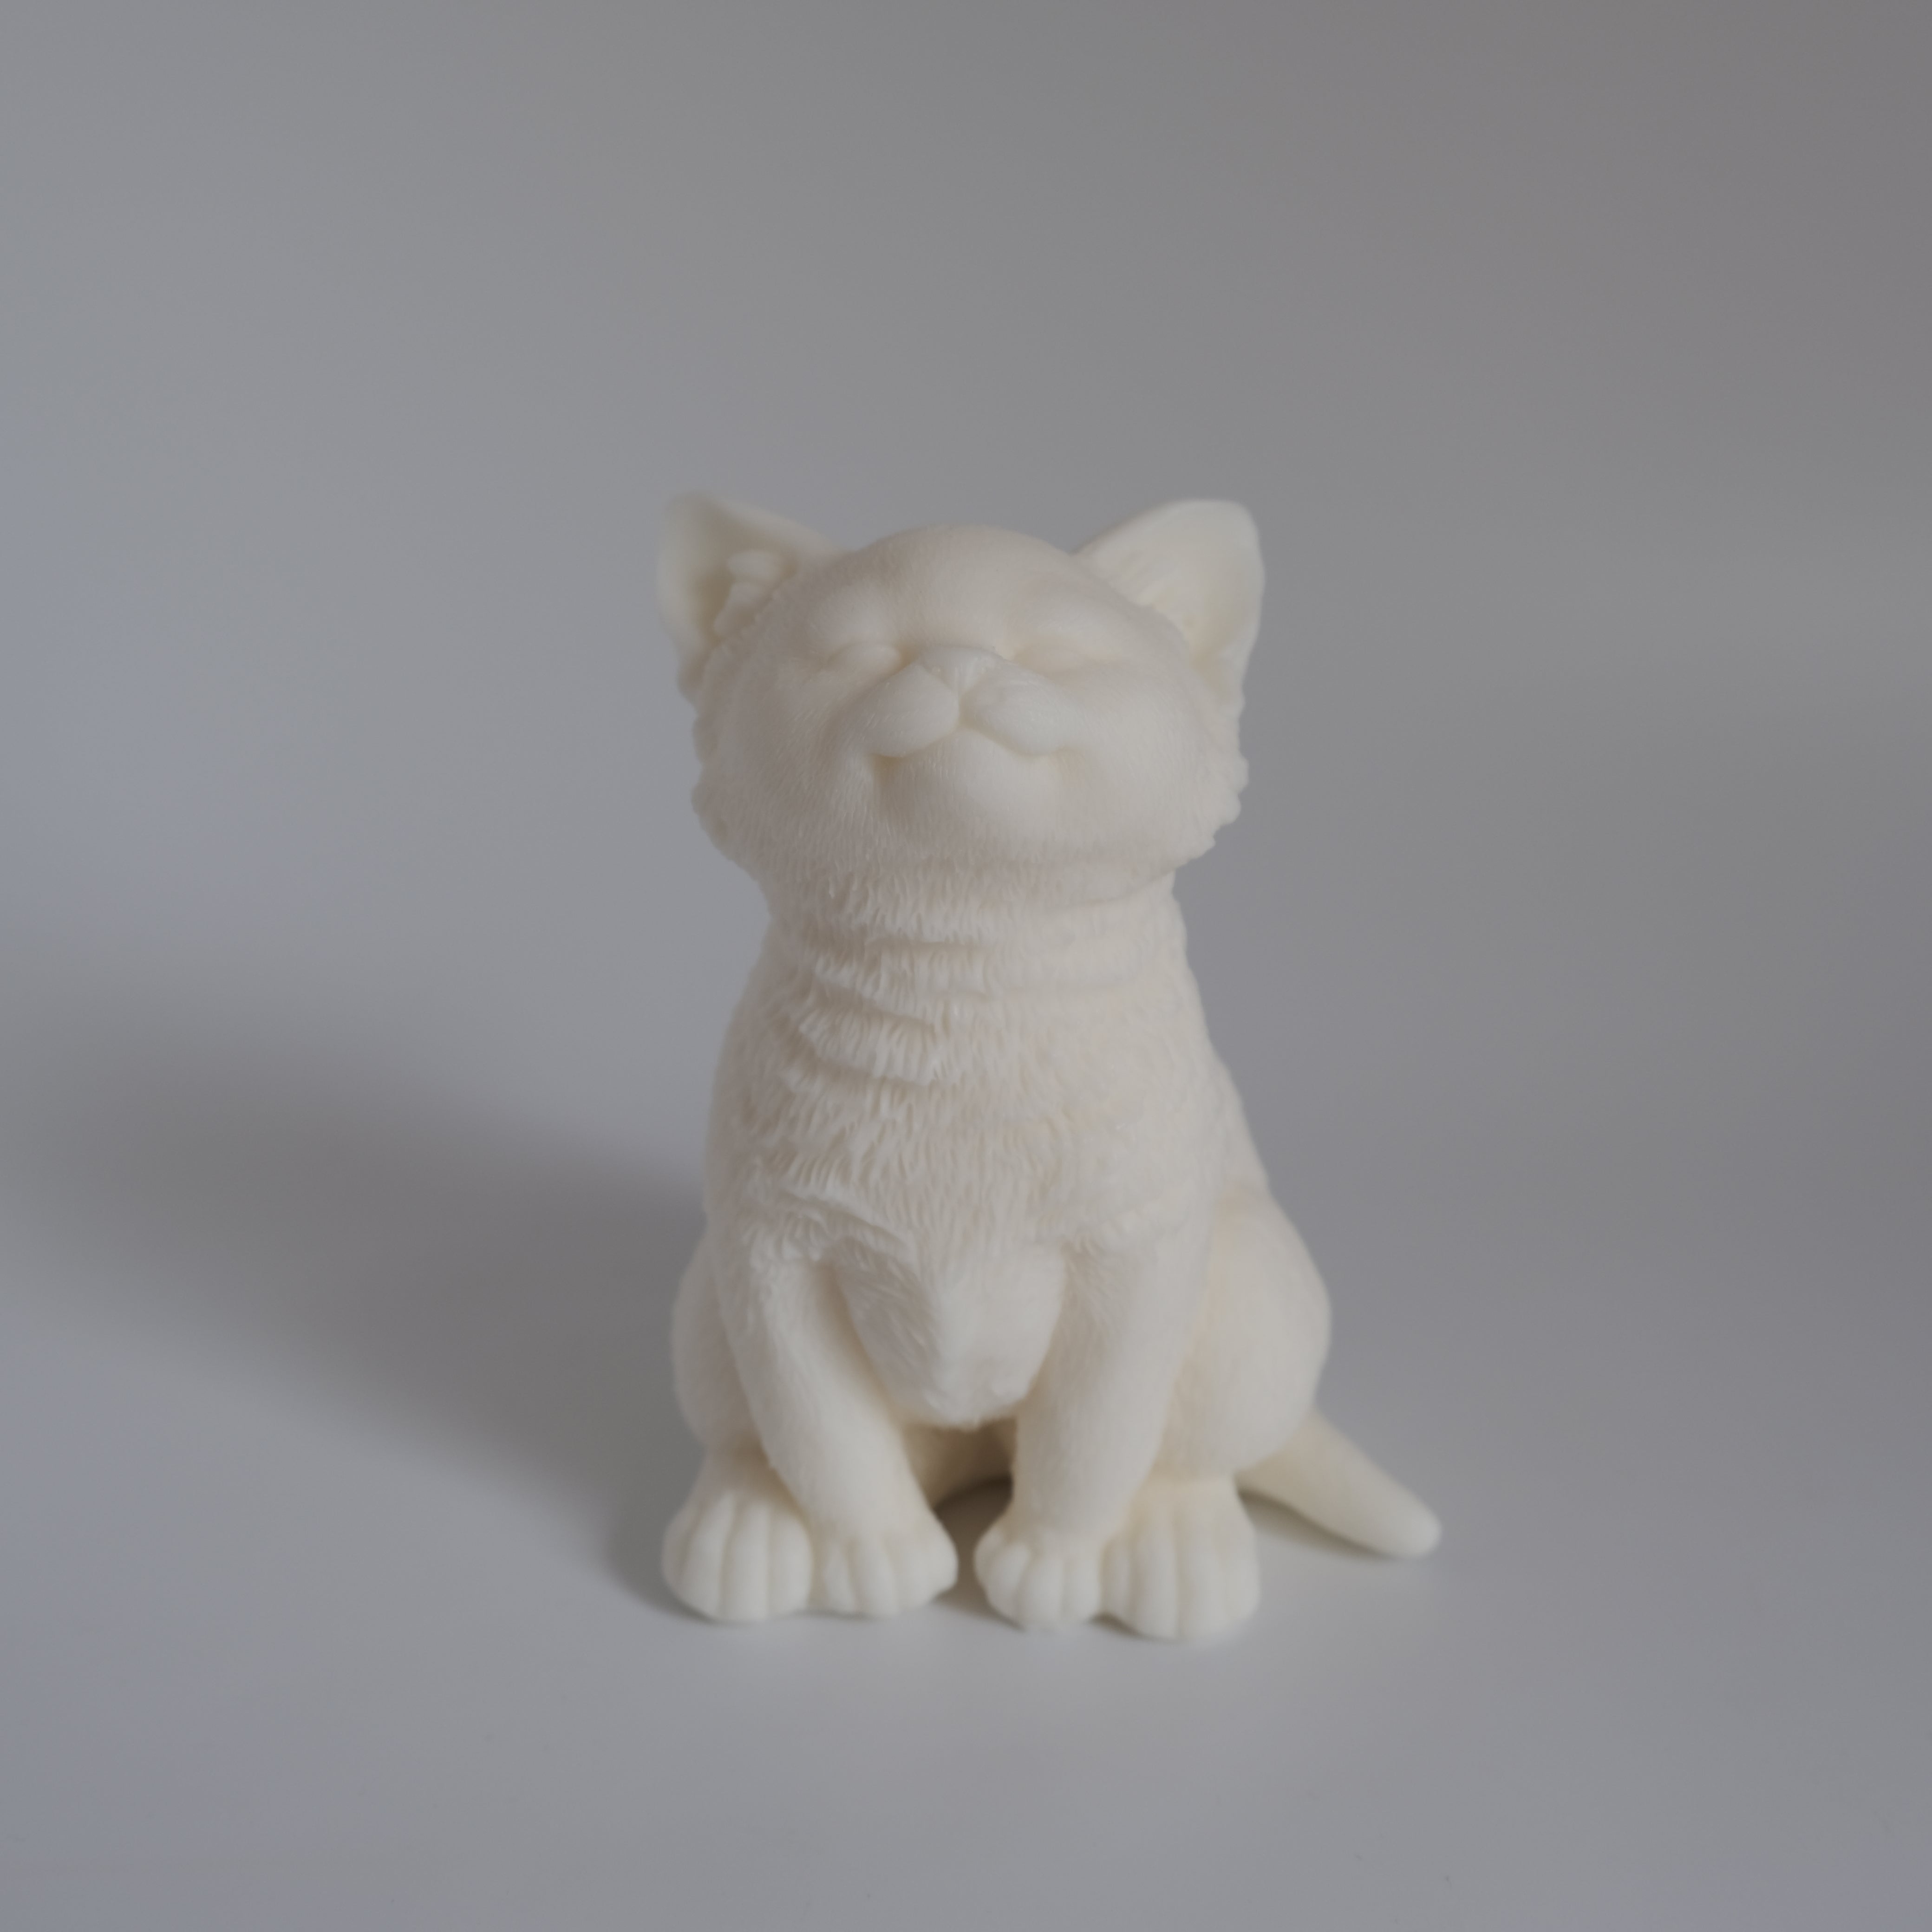 Kitten Candle Mould 4 - Silicone Mould, Mold for DIY Candles. Created using candle making kit with cotton candle wicks and candle colour chips. Using soy wax for pillar candles. Sold by Myka Candles Moulds Australia